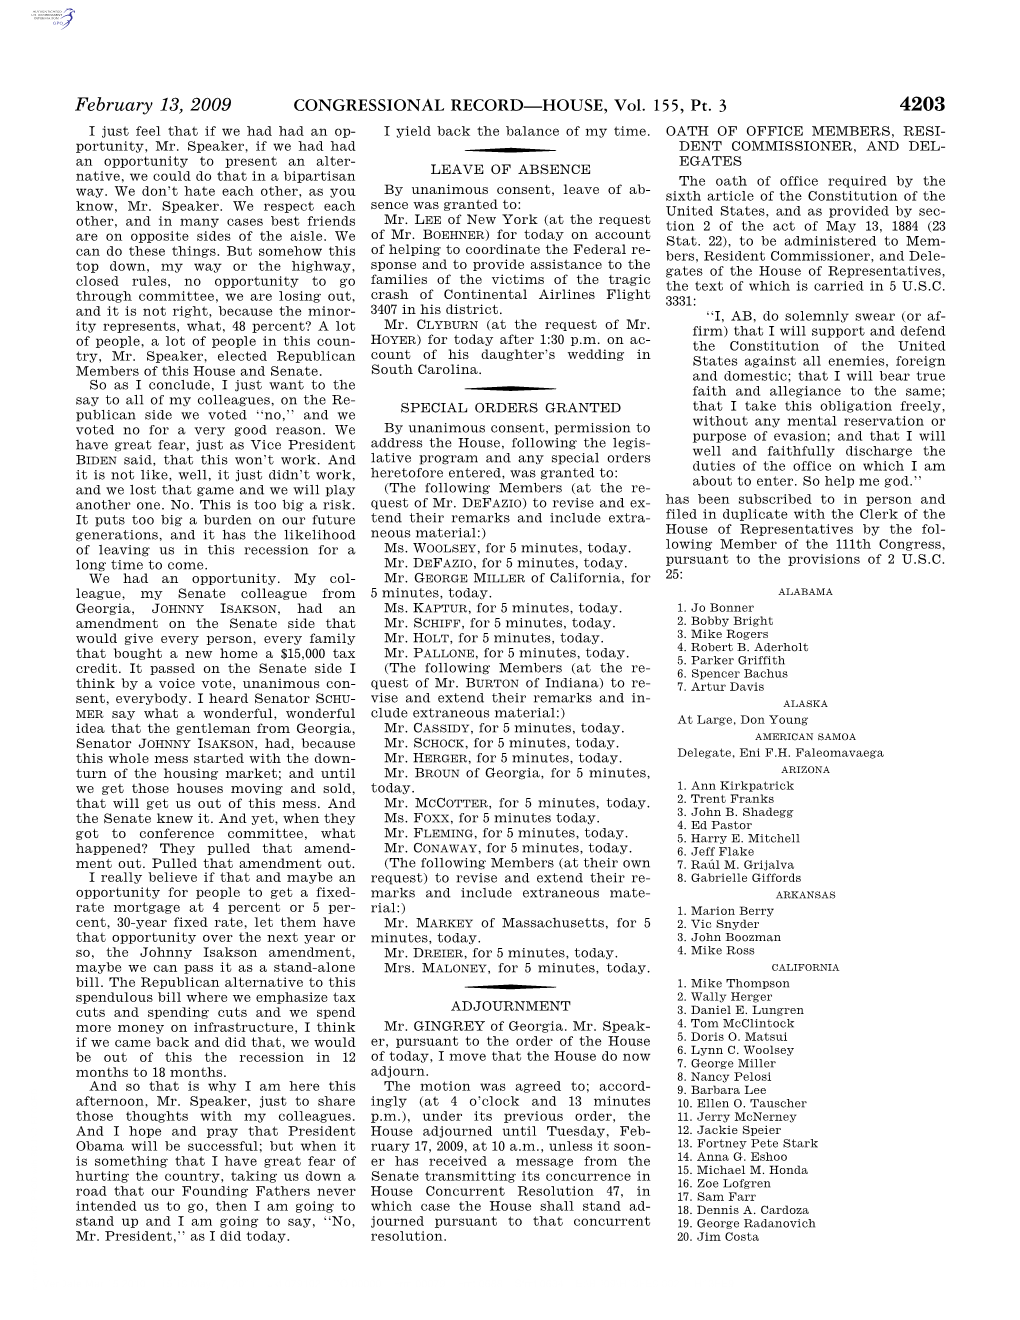 CONGRESSIONAL RECORD—HOUSE, Vol. 155, Pt. 3 February 13, 2009 21